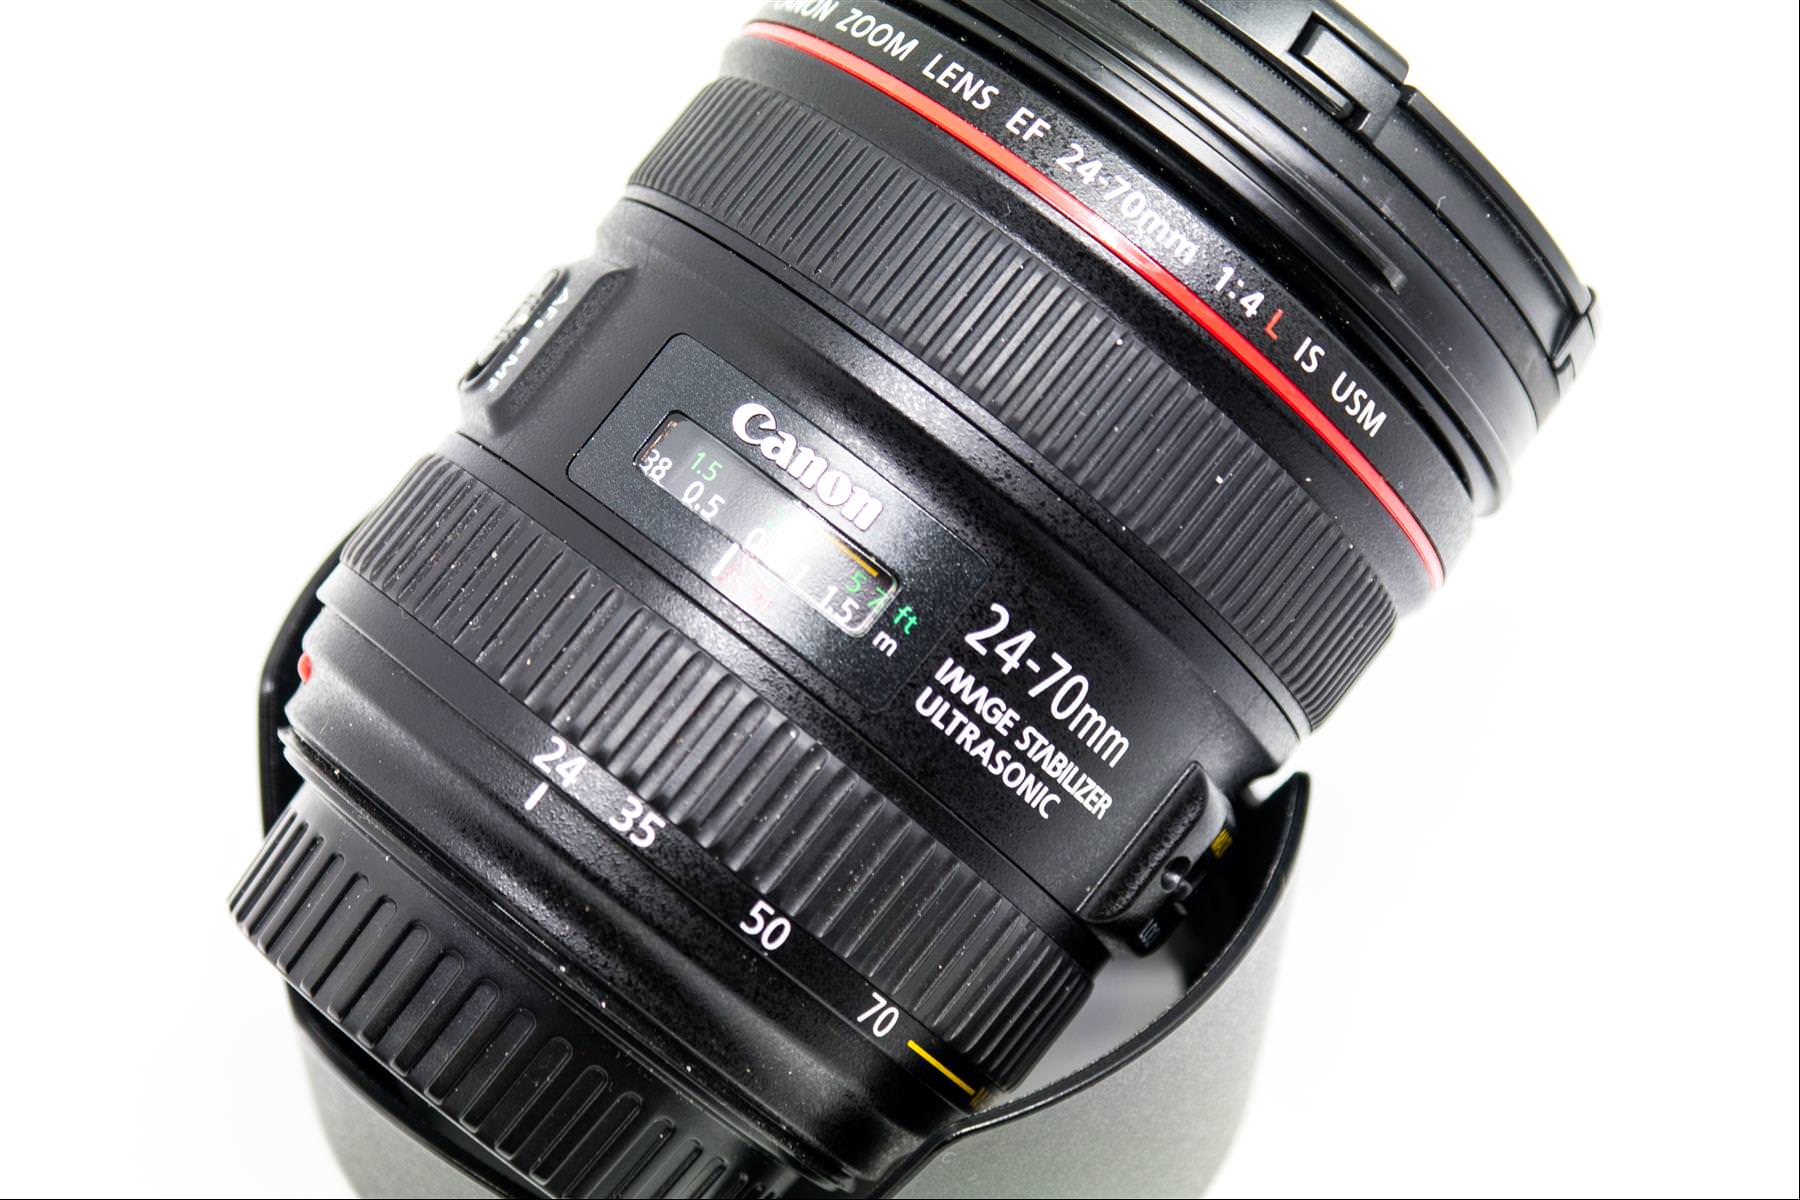 Canon EF 24-70mm F4L IS